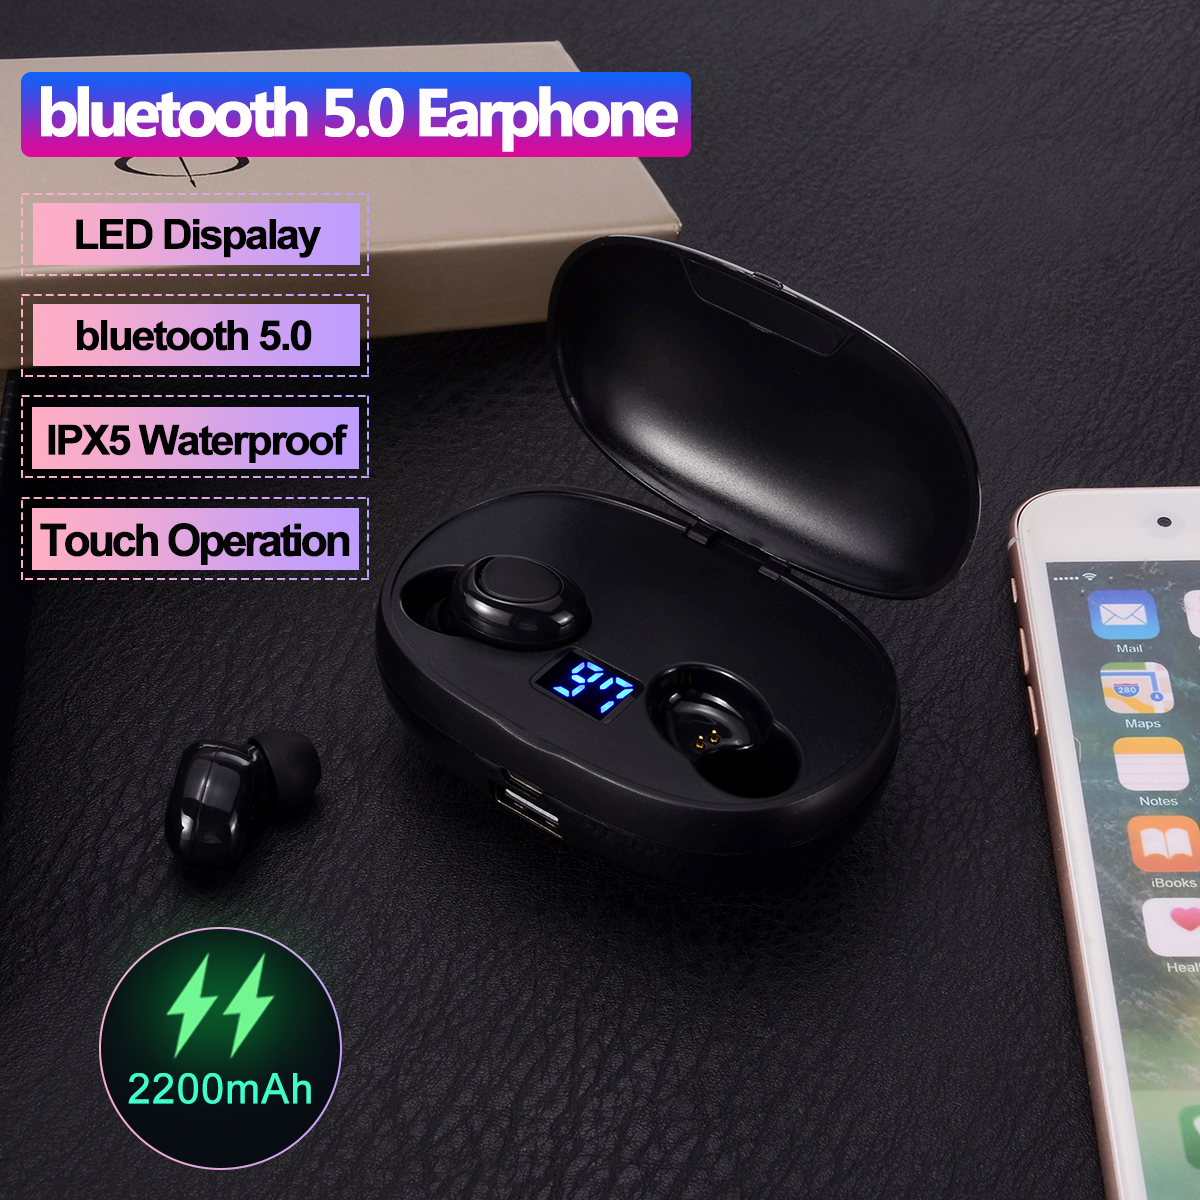 Dual-Digital-Display-True-Wireless-Headset-Button-Touch-bluetooth-50-Earphone-with-Portable-Charging-1565020-1